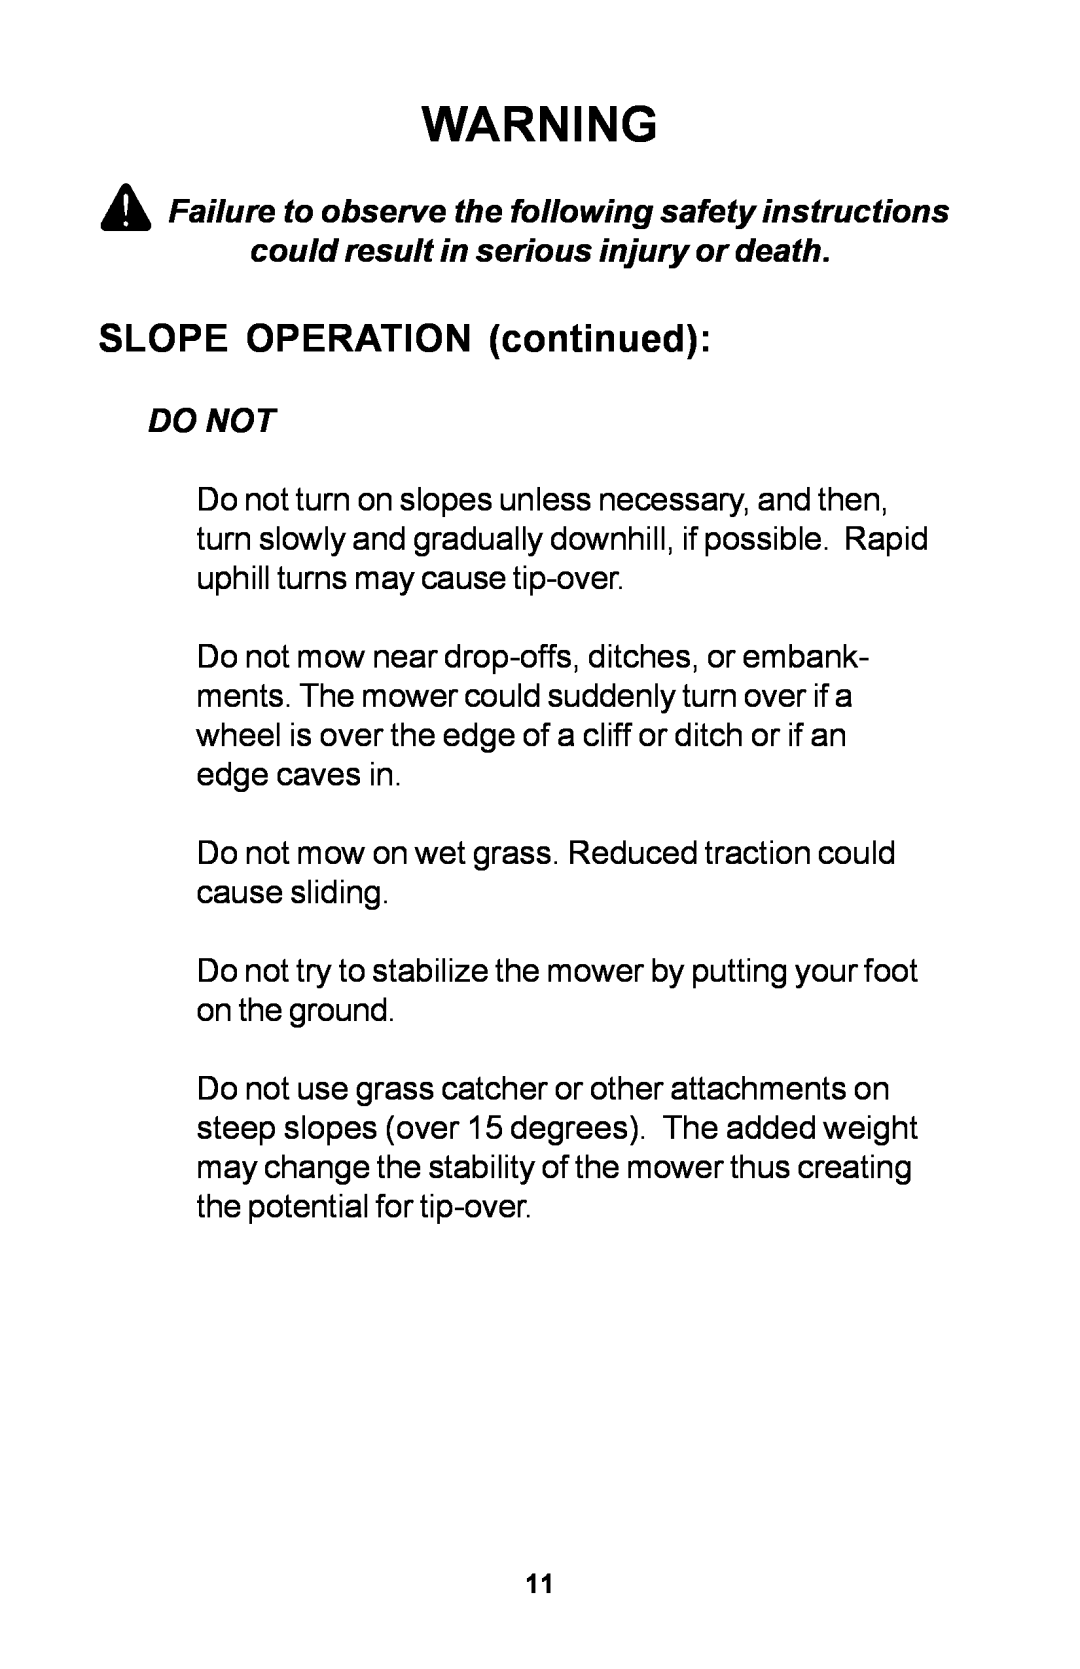 Dixon ZTR manual SLOPE OPERATION continued, Do not mow on wet grass. Reduced traction could cause sliding 